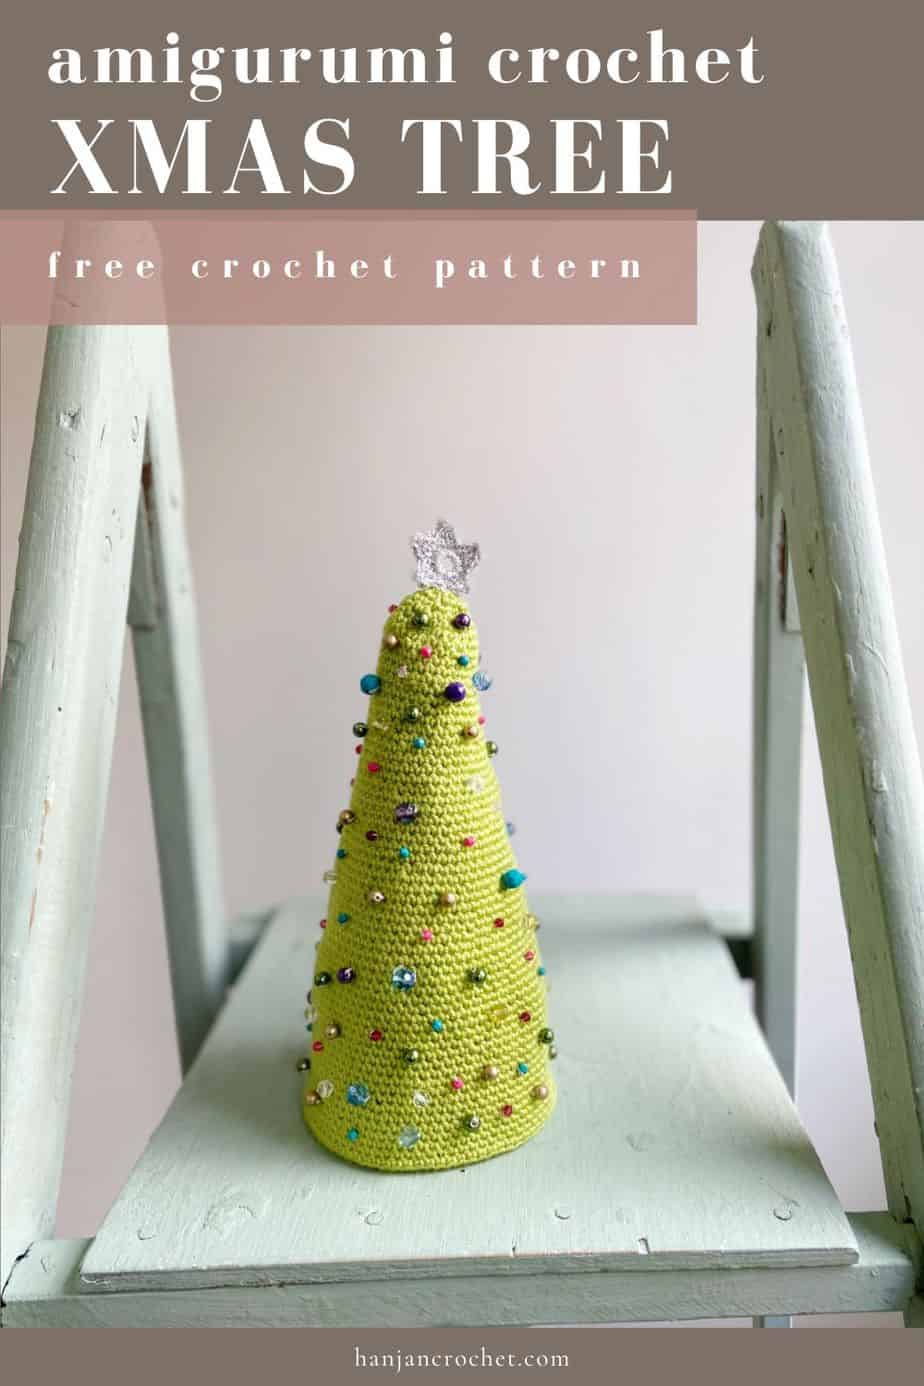 Beaded Amigurumi Crochet Christmas Tree Pattern with star on top sitting on a wooden ladder